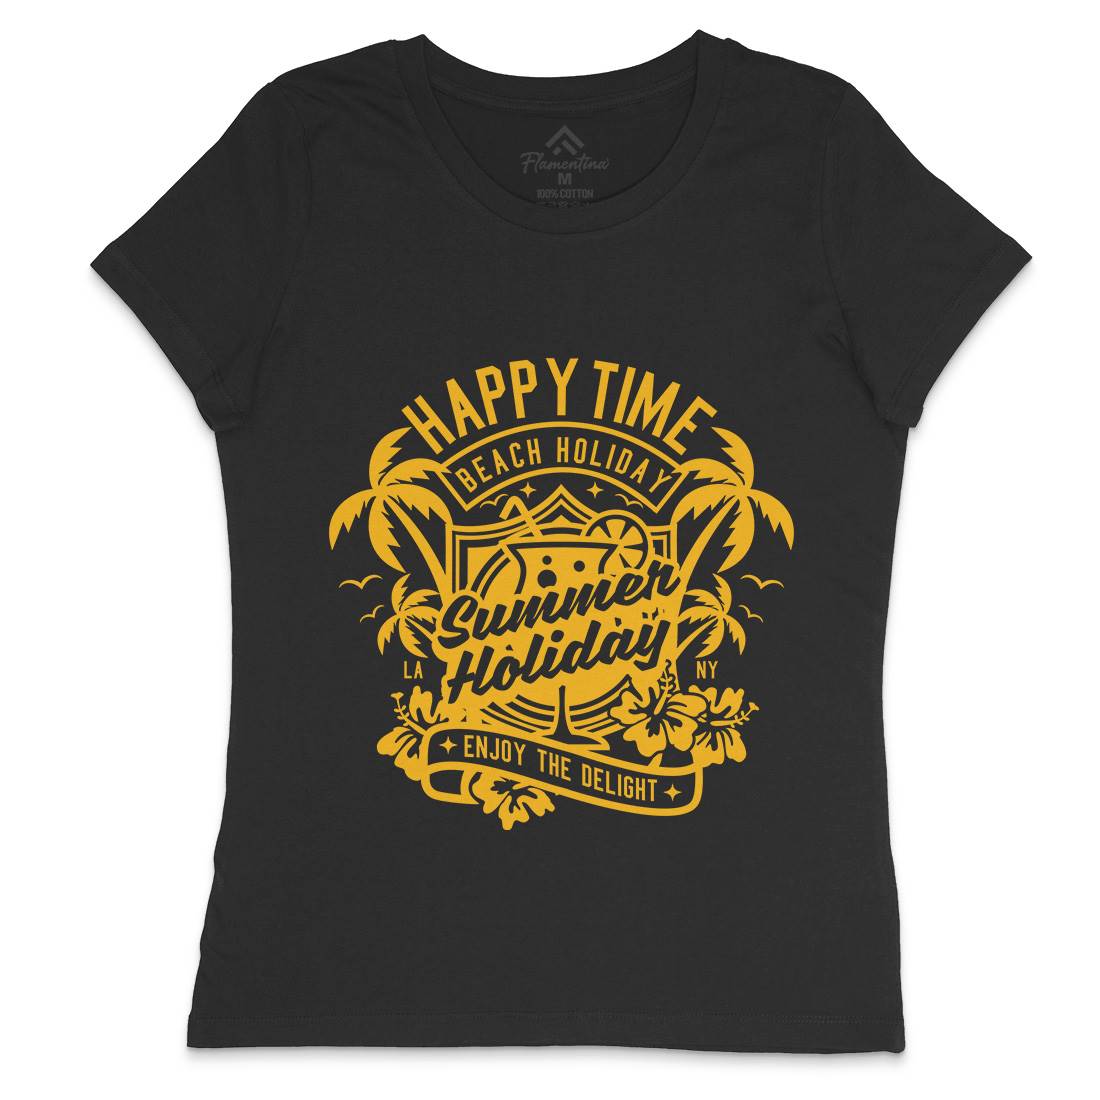 Happy Time Womens Crew Neck T-Shirt Surf A238